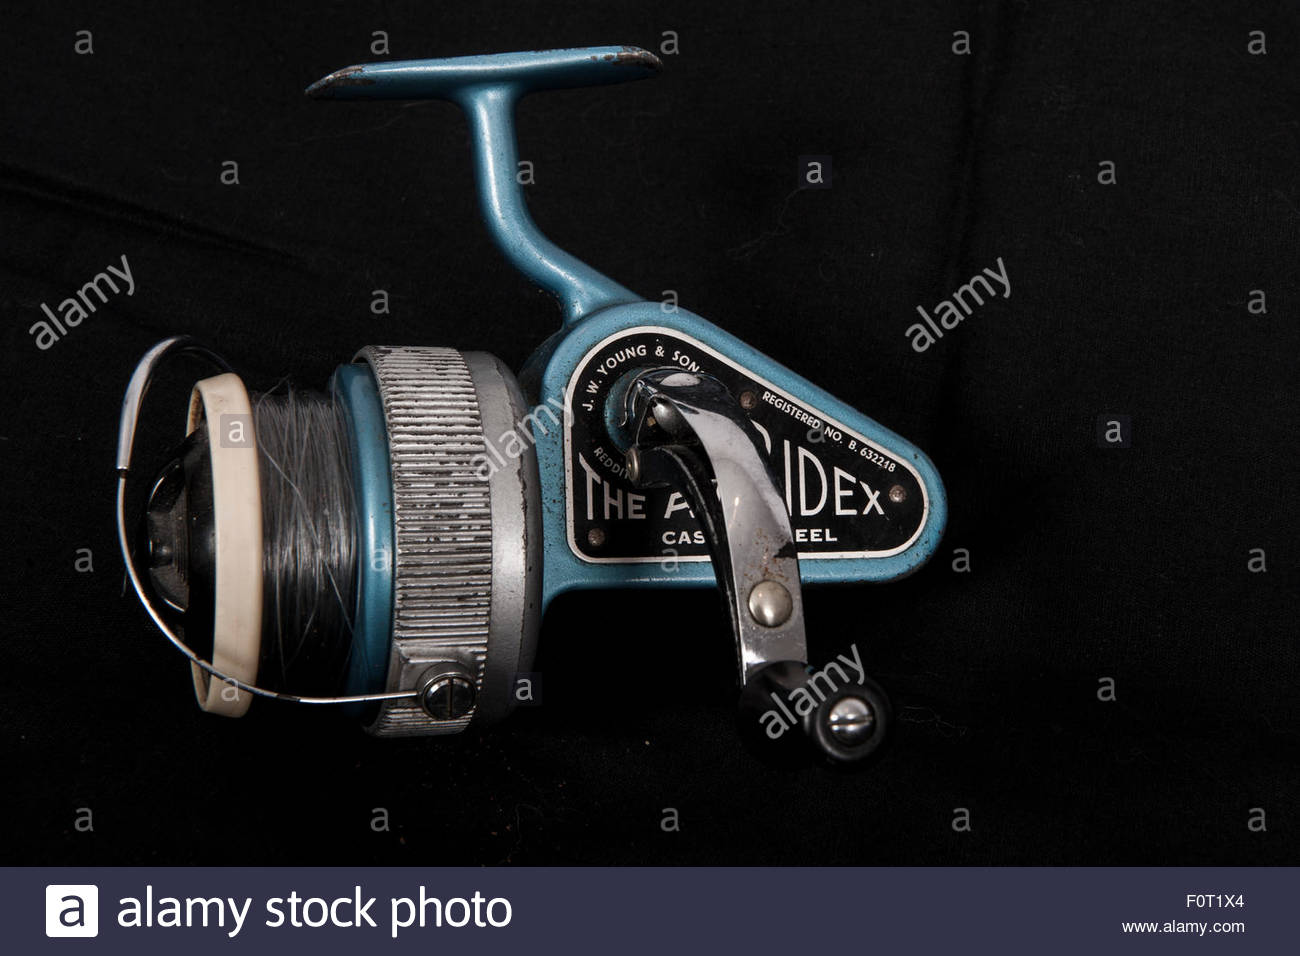 A Vintage Fishing Reel The Ambidex From J W Young On Black